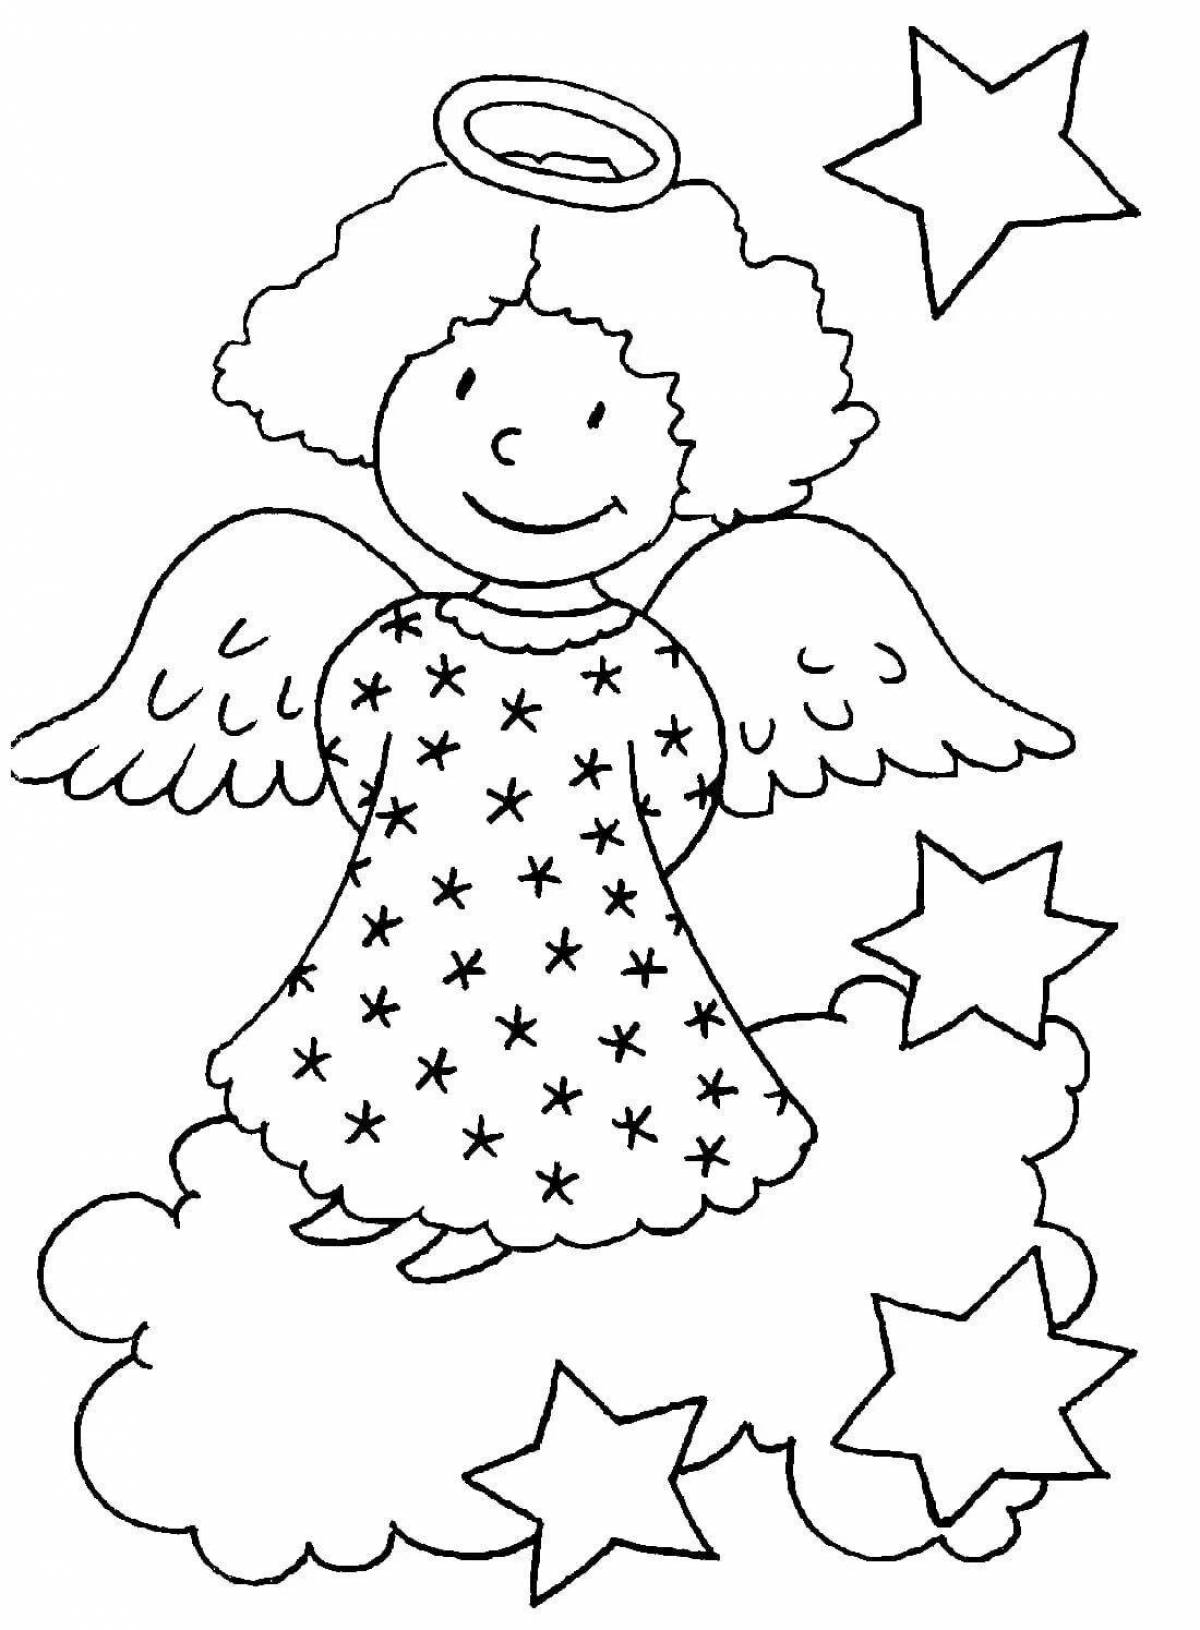 Cute angel coloring book for kids